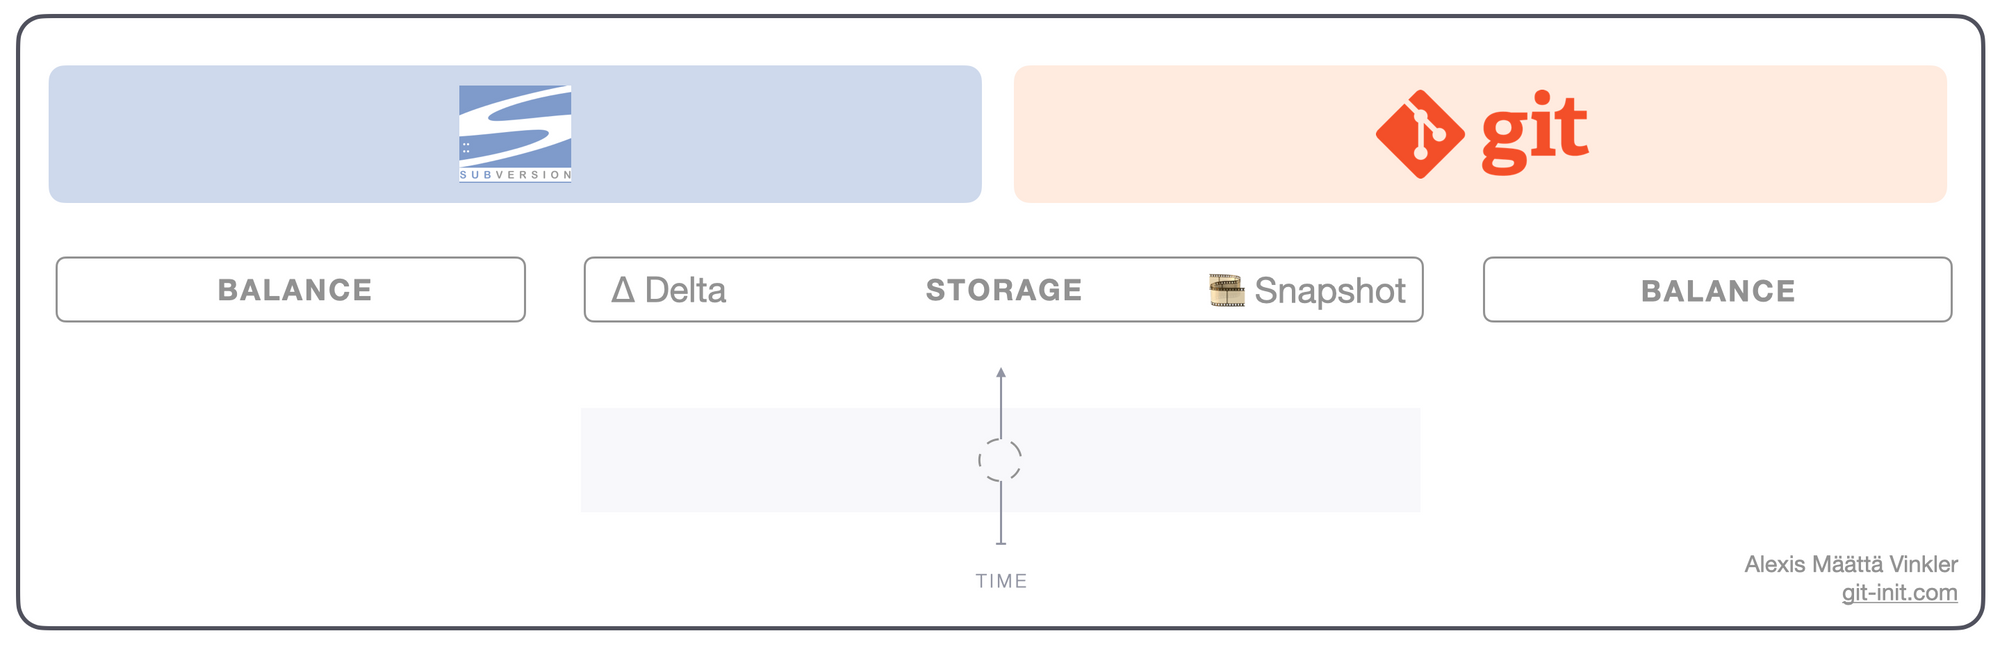 How Snapshot and Delta Storage Differs